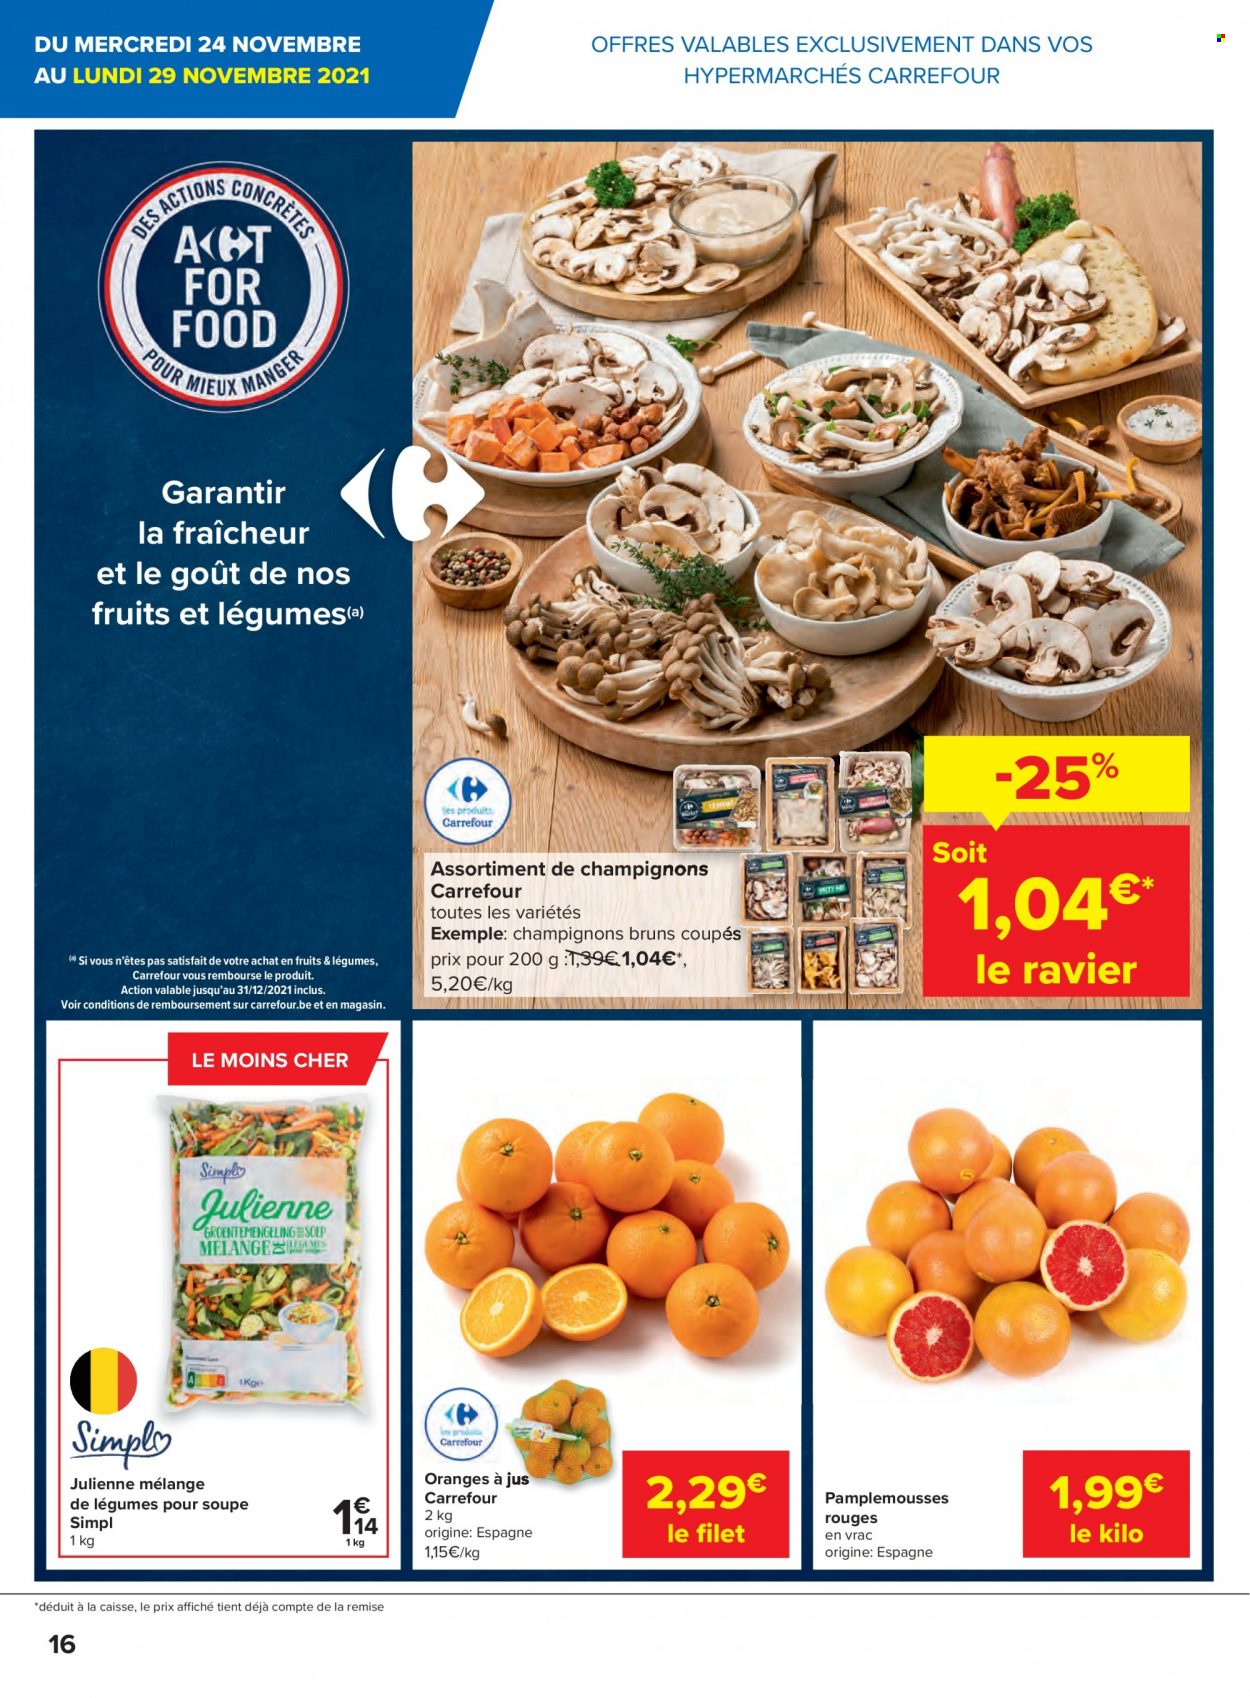 Catalogue Carrefour hypermarkt - 24.11.2021 - 6.12.2021. Page 16.